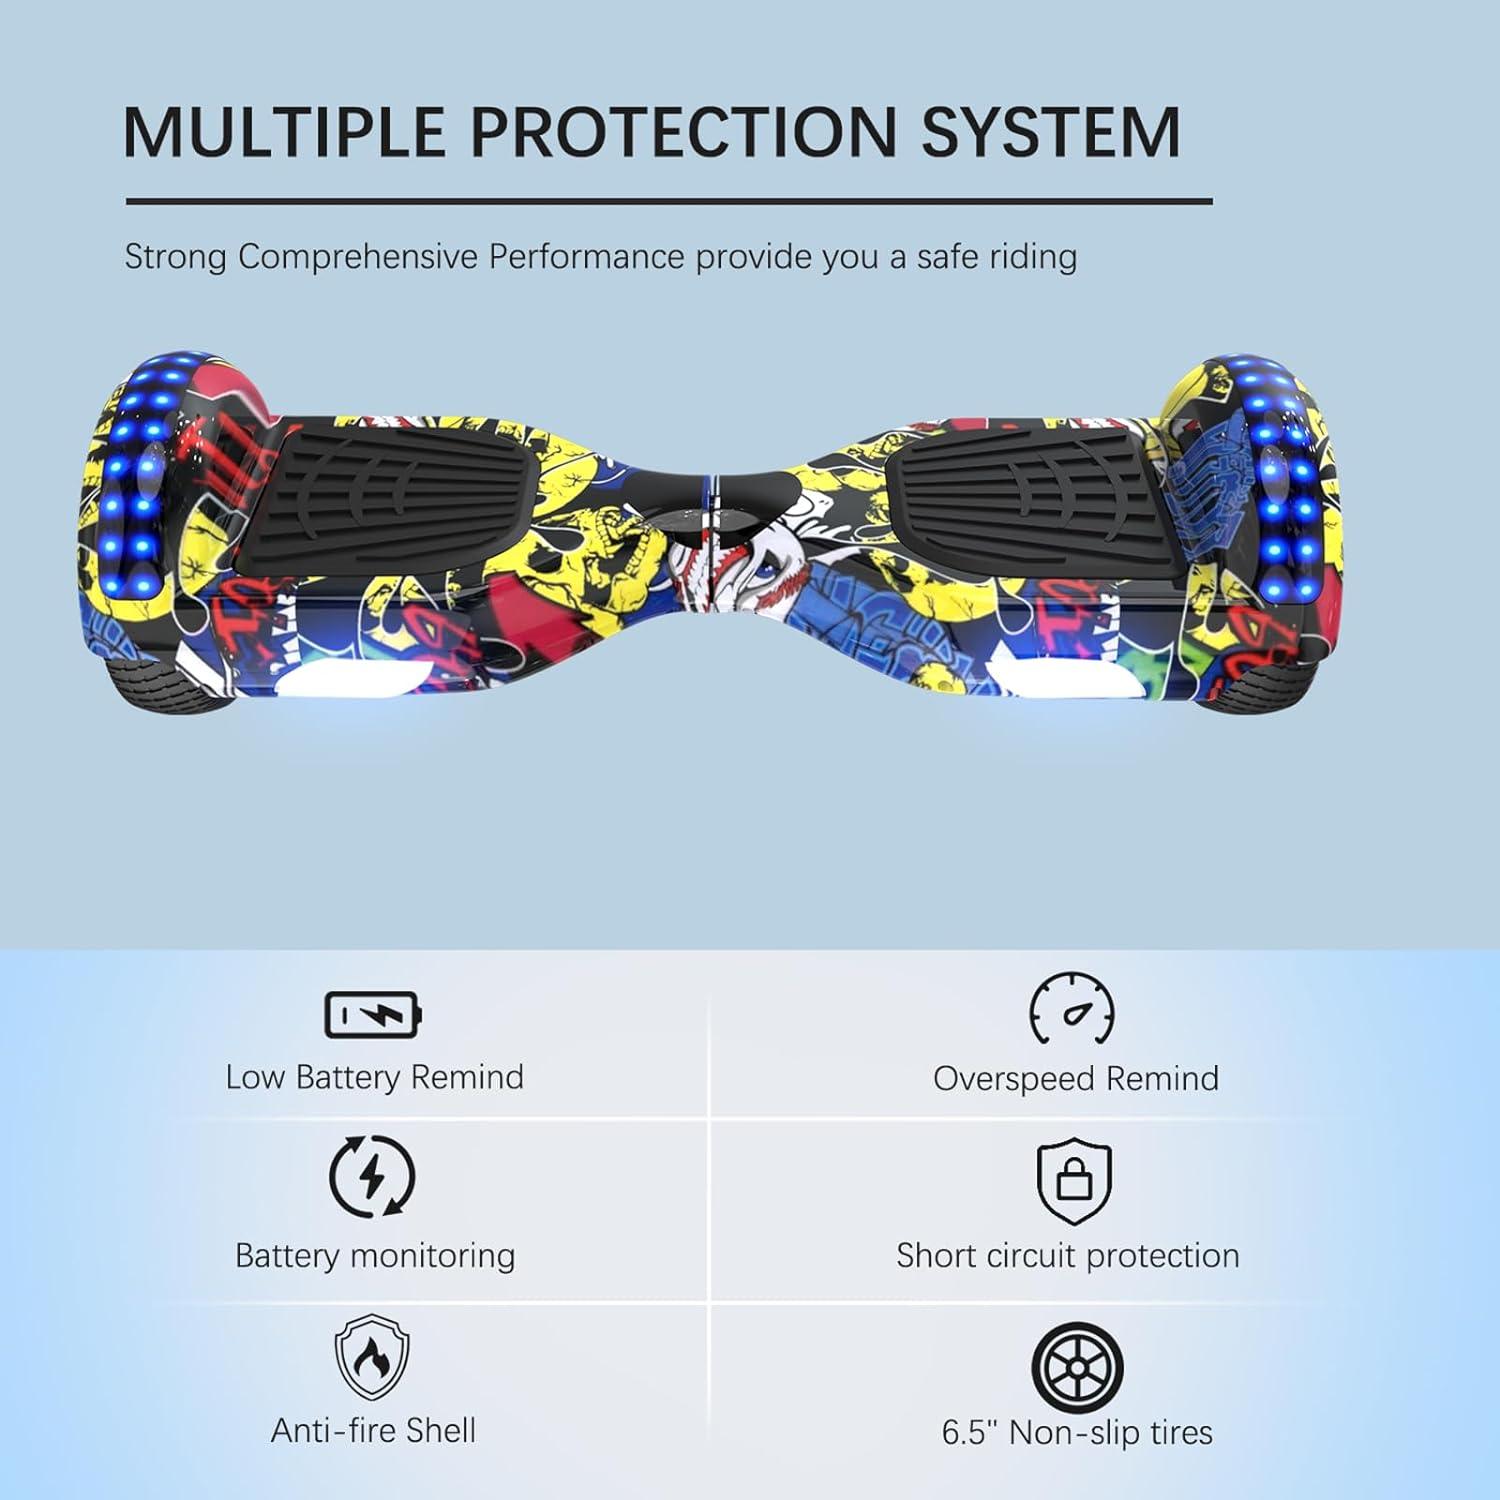 RCB Hoverboards 6.5 inch with Bluetooth, Speaker, Colorful LED Lights - Massive Discounts